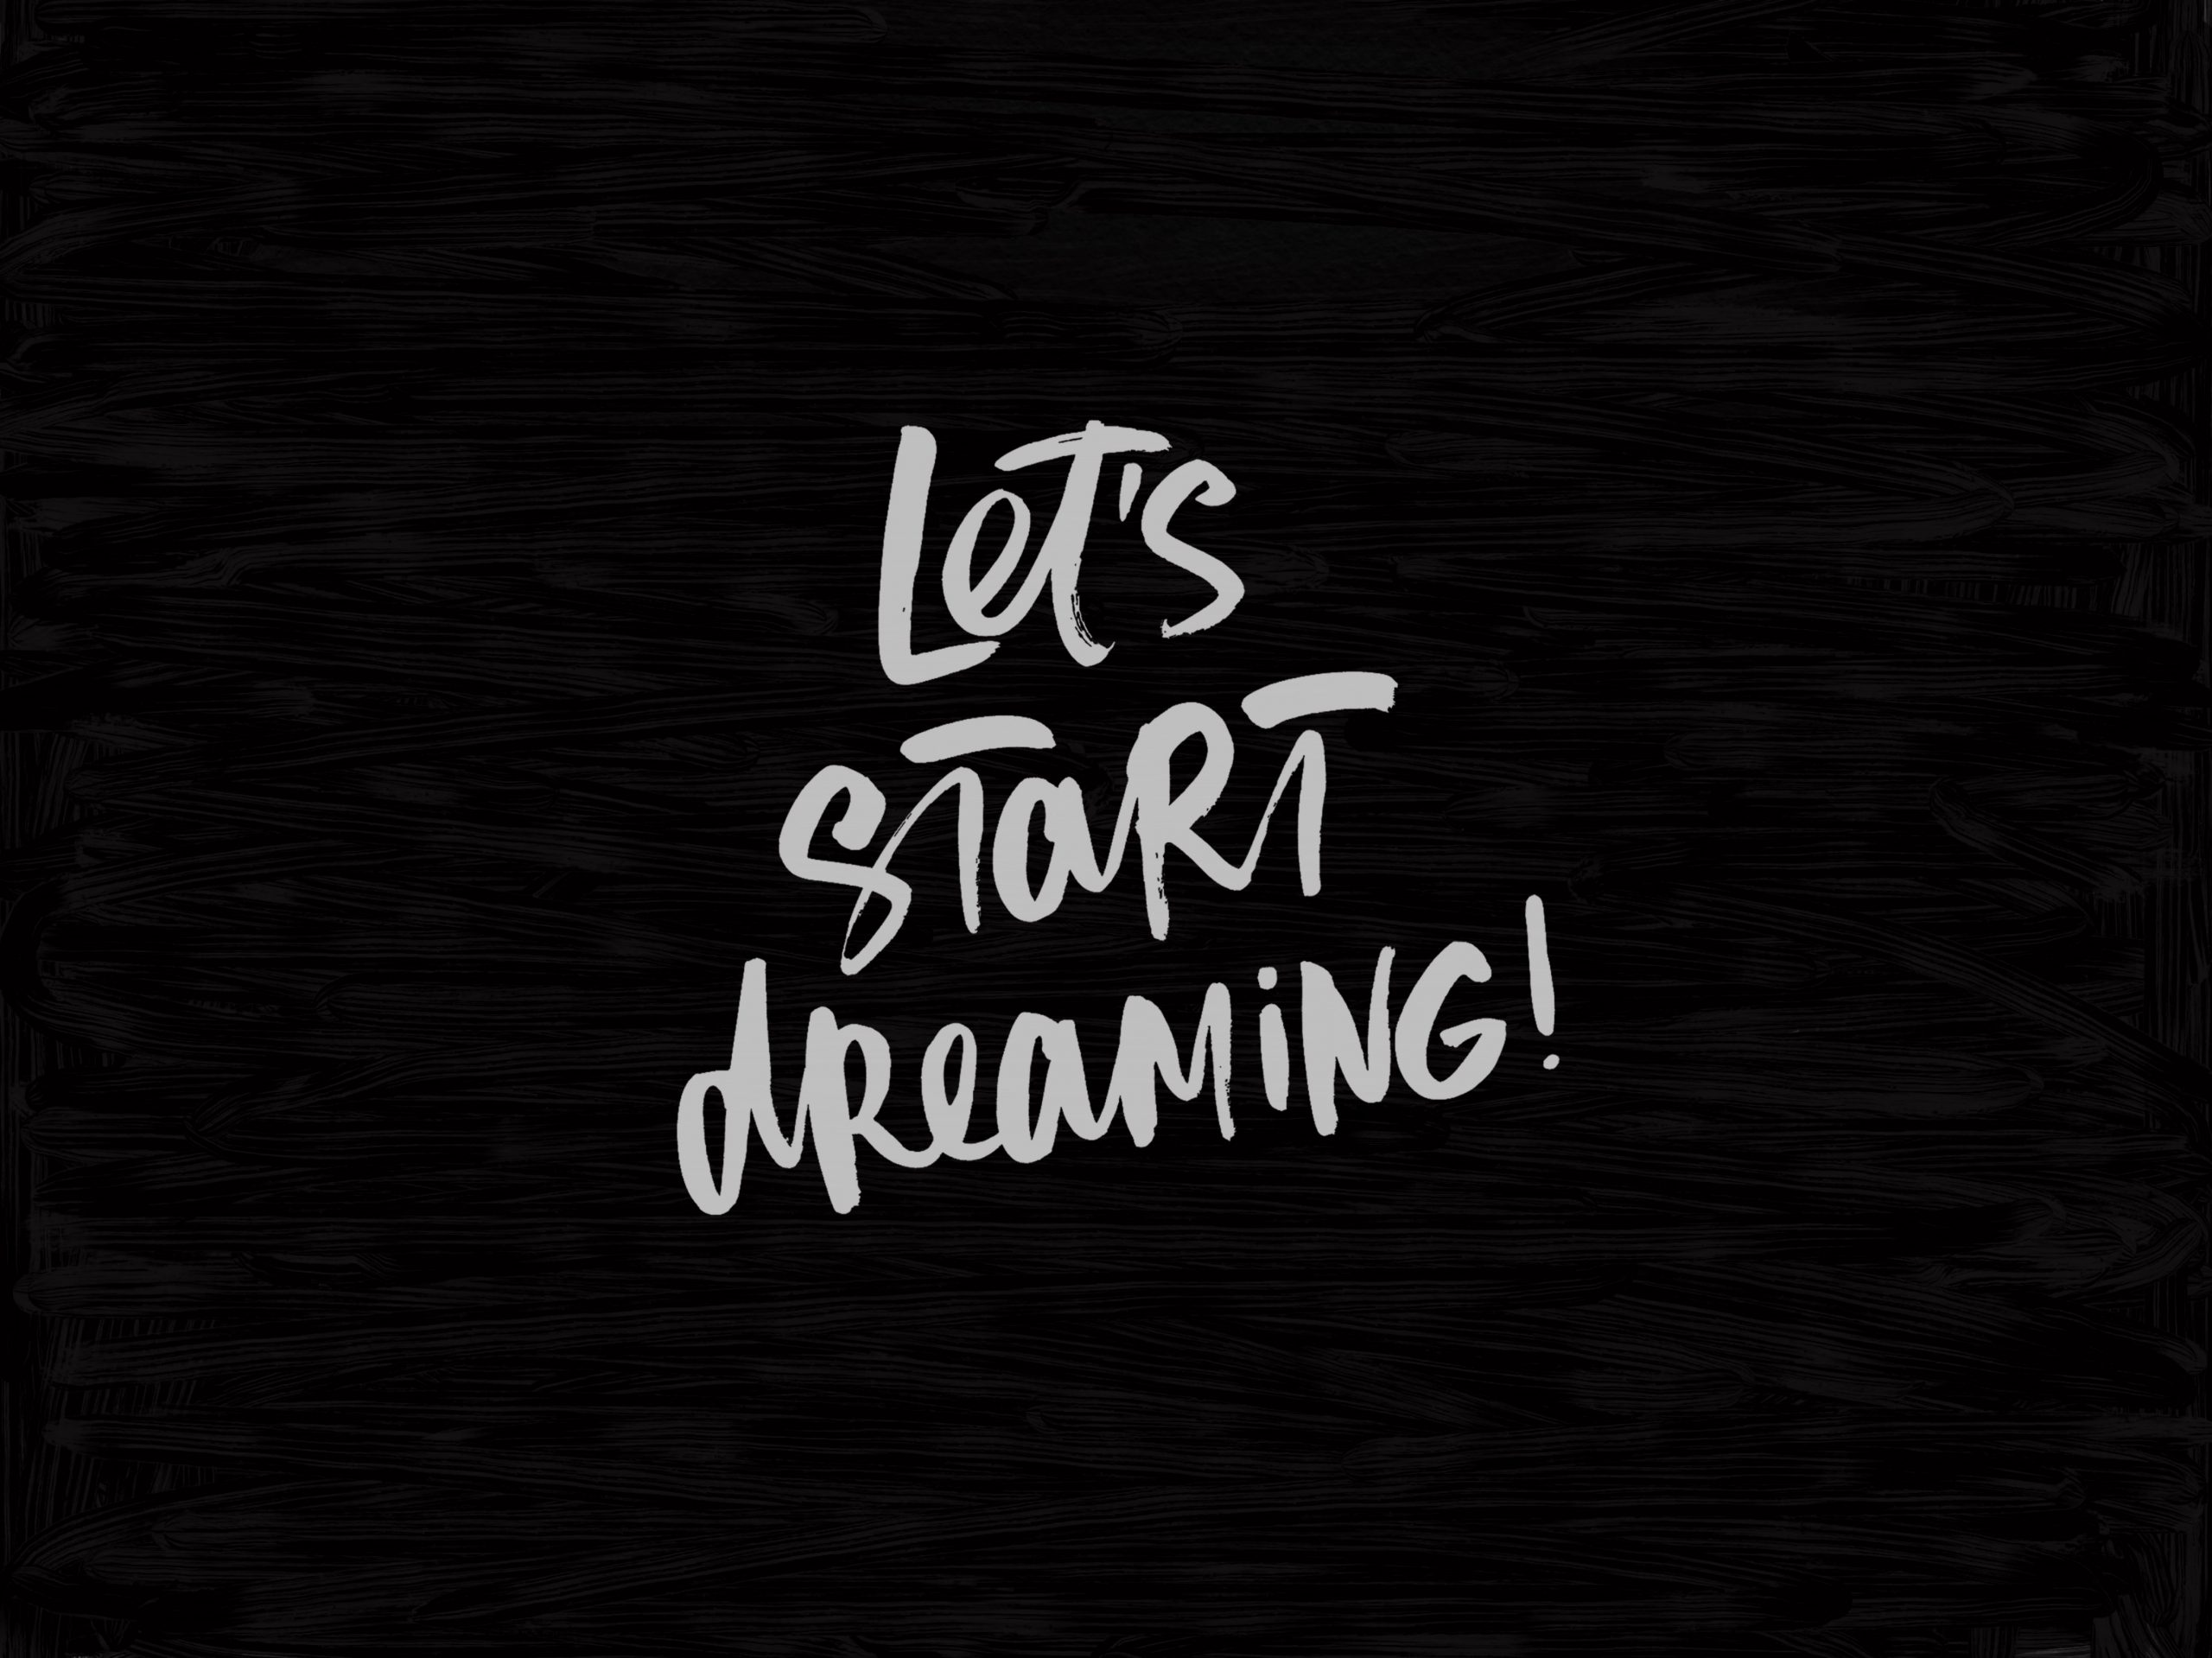 Wallpaper Black Background With Let's Start Dreaming Text